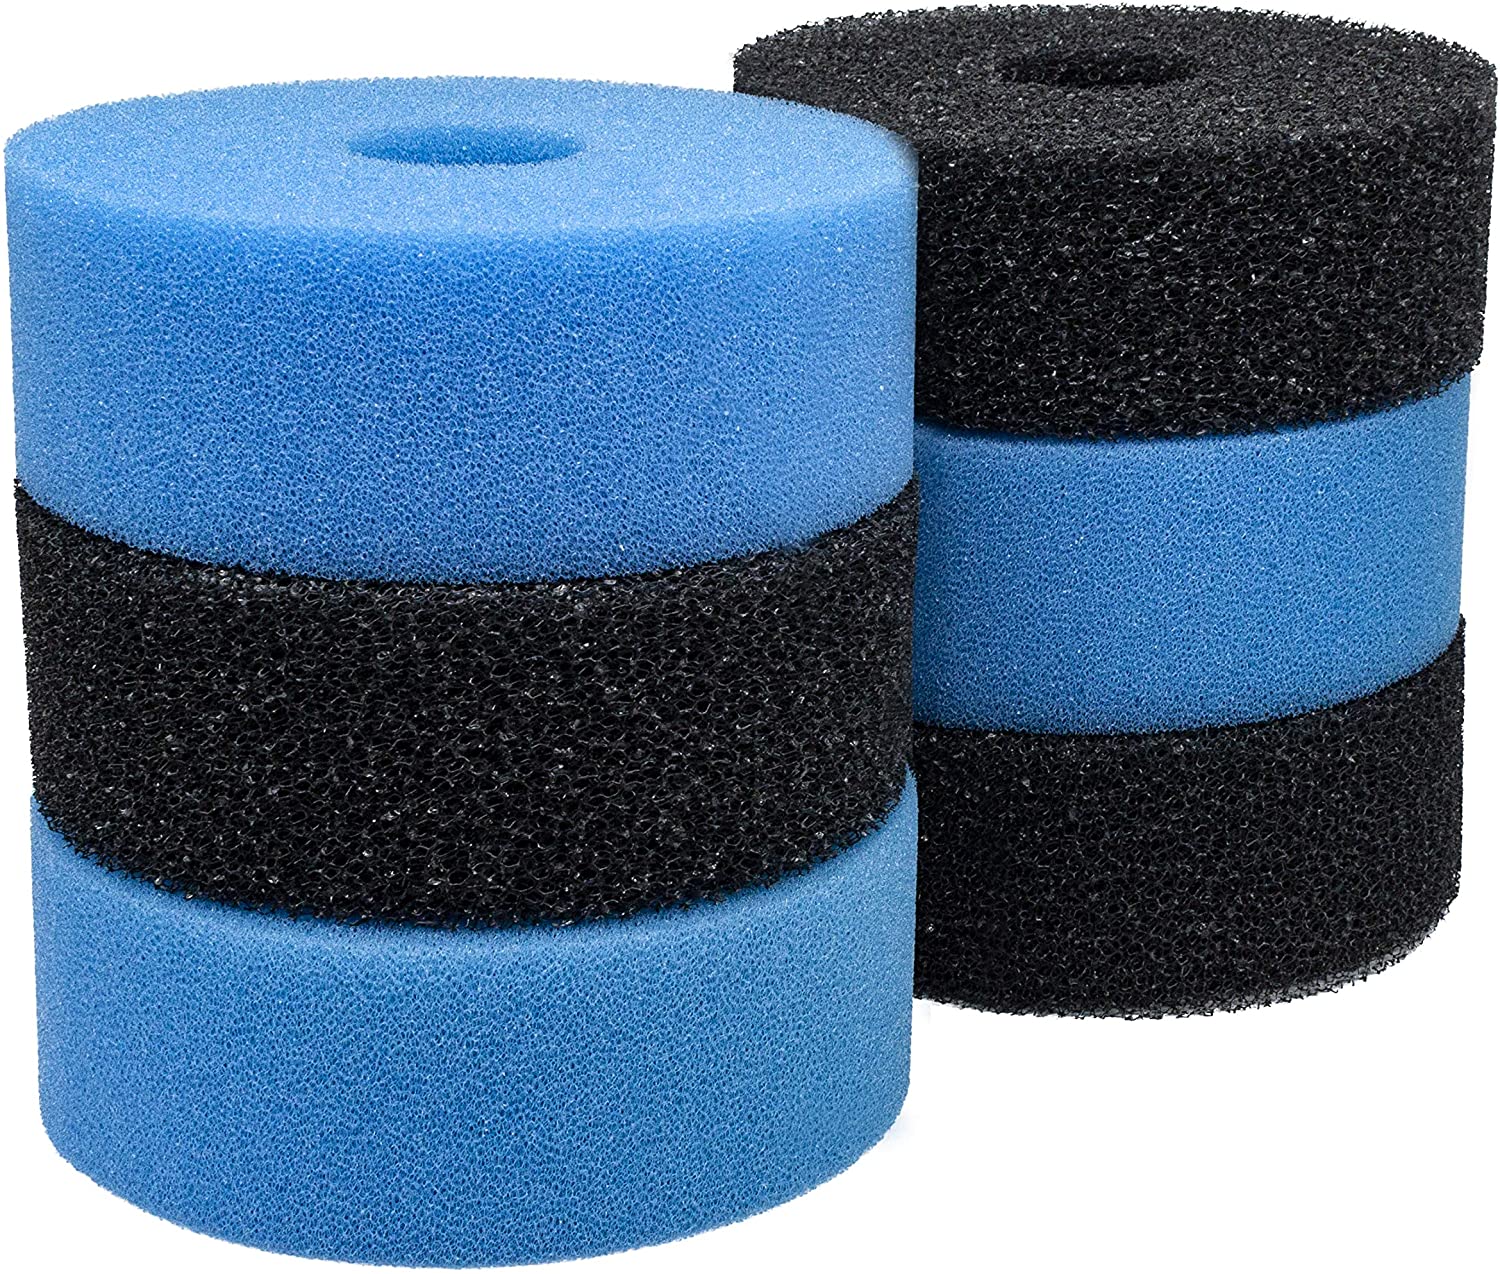 LTWHOME Black and Blue Filter Sponge Fit for Jebao CF-10, PF-10 and Bermuda 4000 Pressure Filter (Pack of 3 Sets)